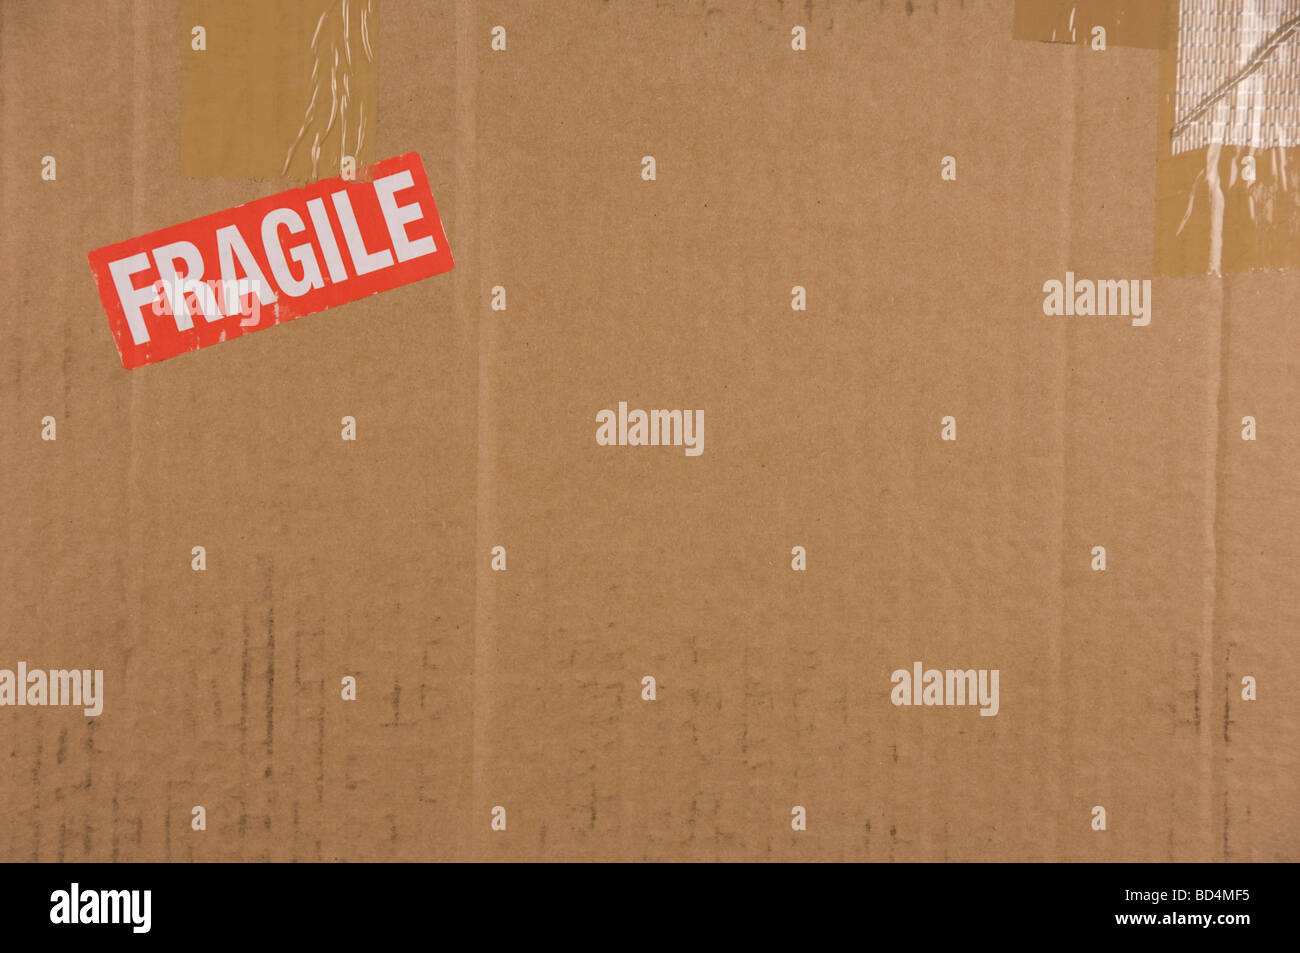 Cardboard Box Background with Fragile in red Stock Photo